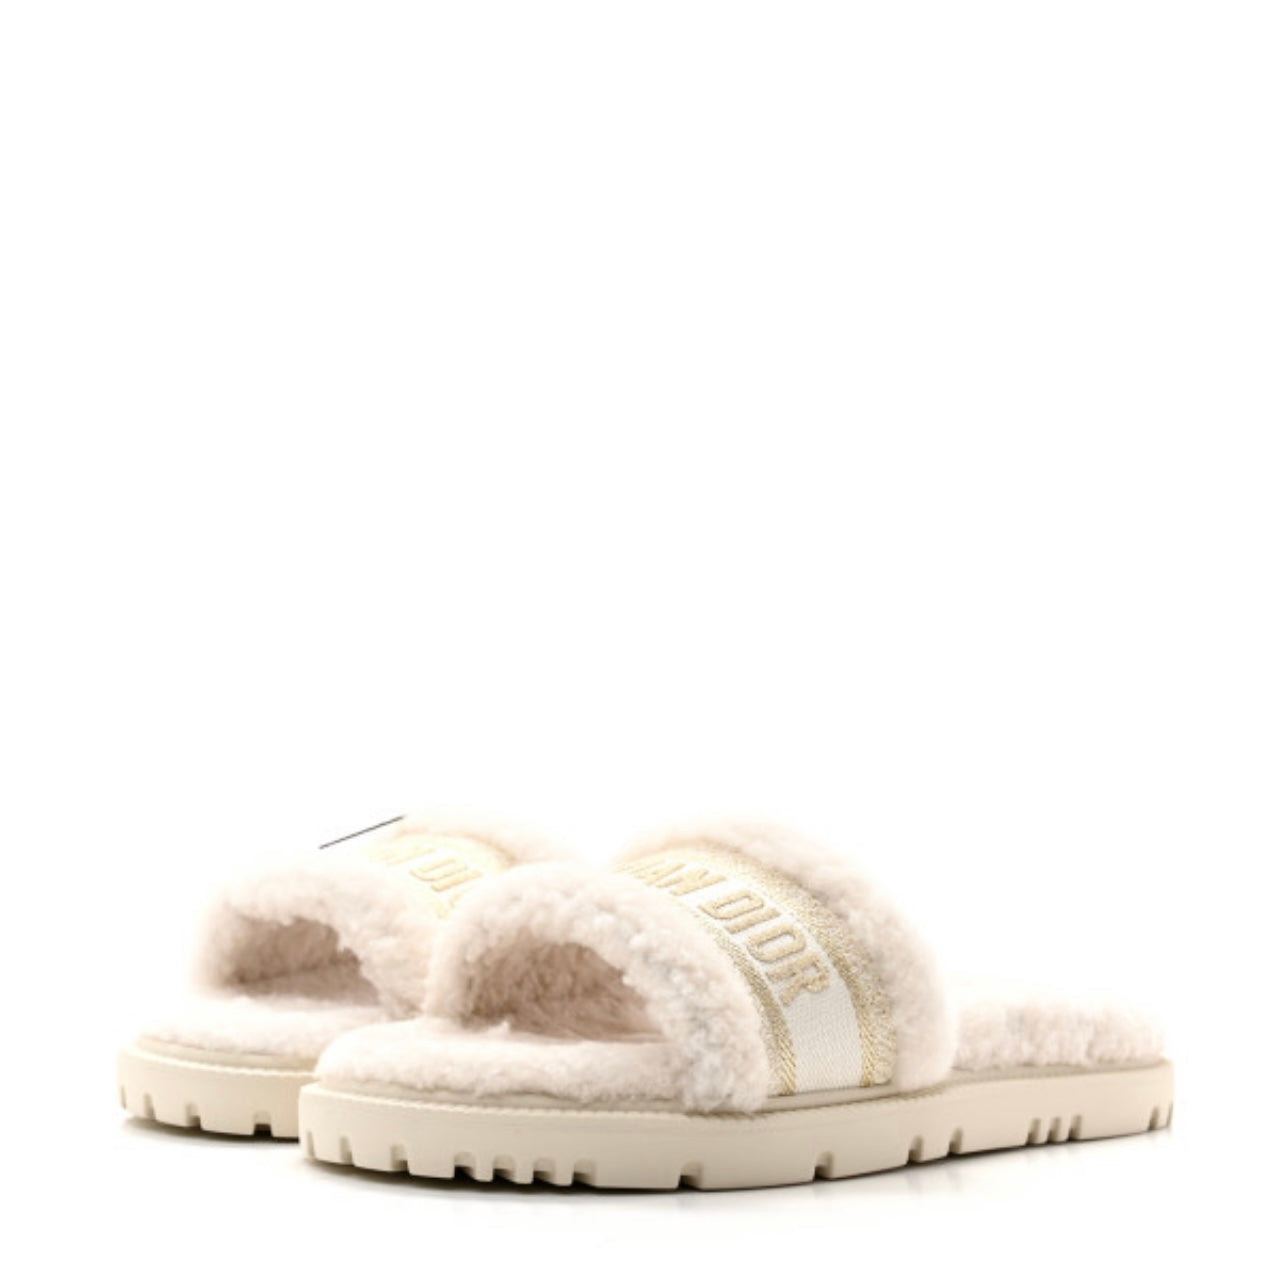 CHRISTIAN DIOR Shearling Canvas Embroidered Toile de Jouy Dway Slide